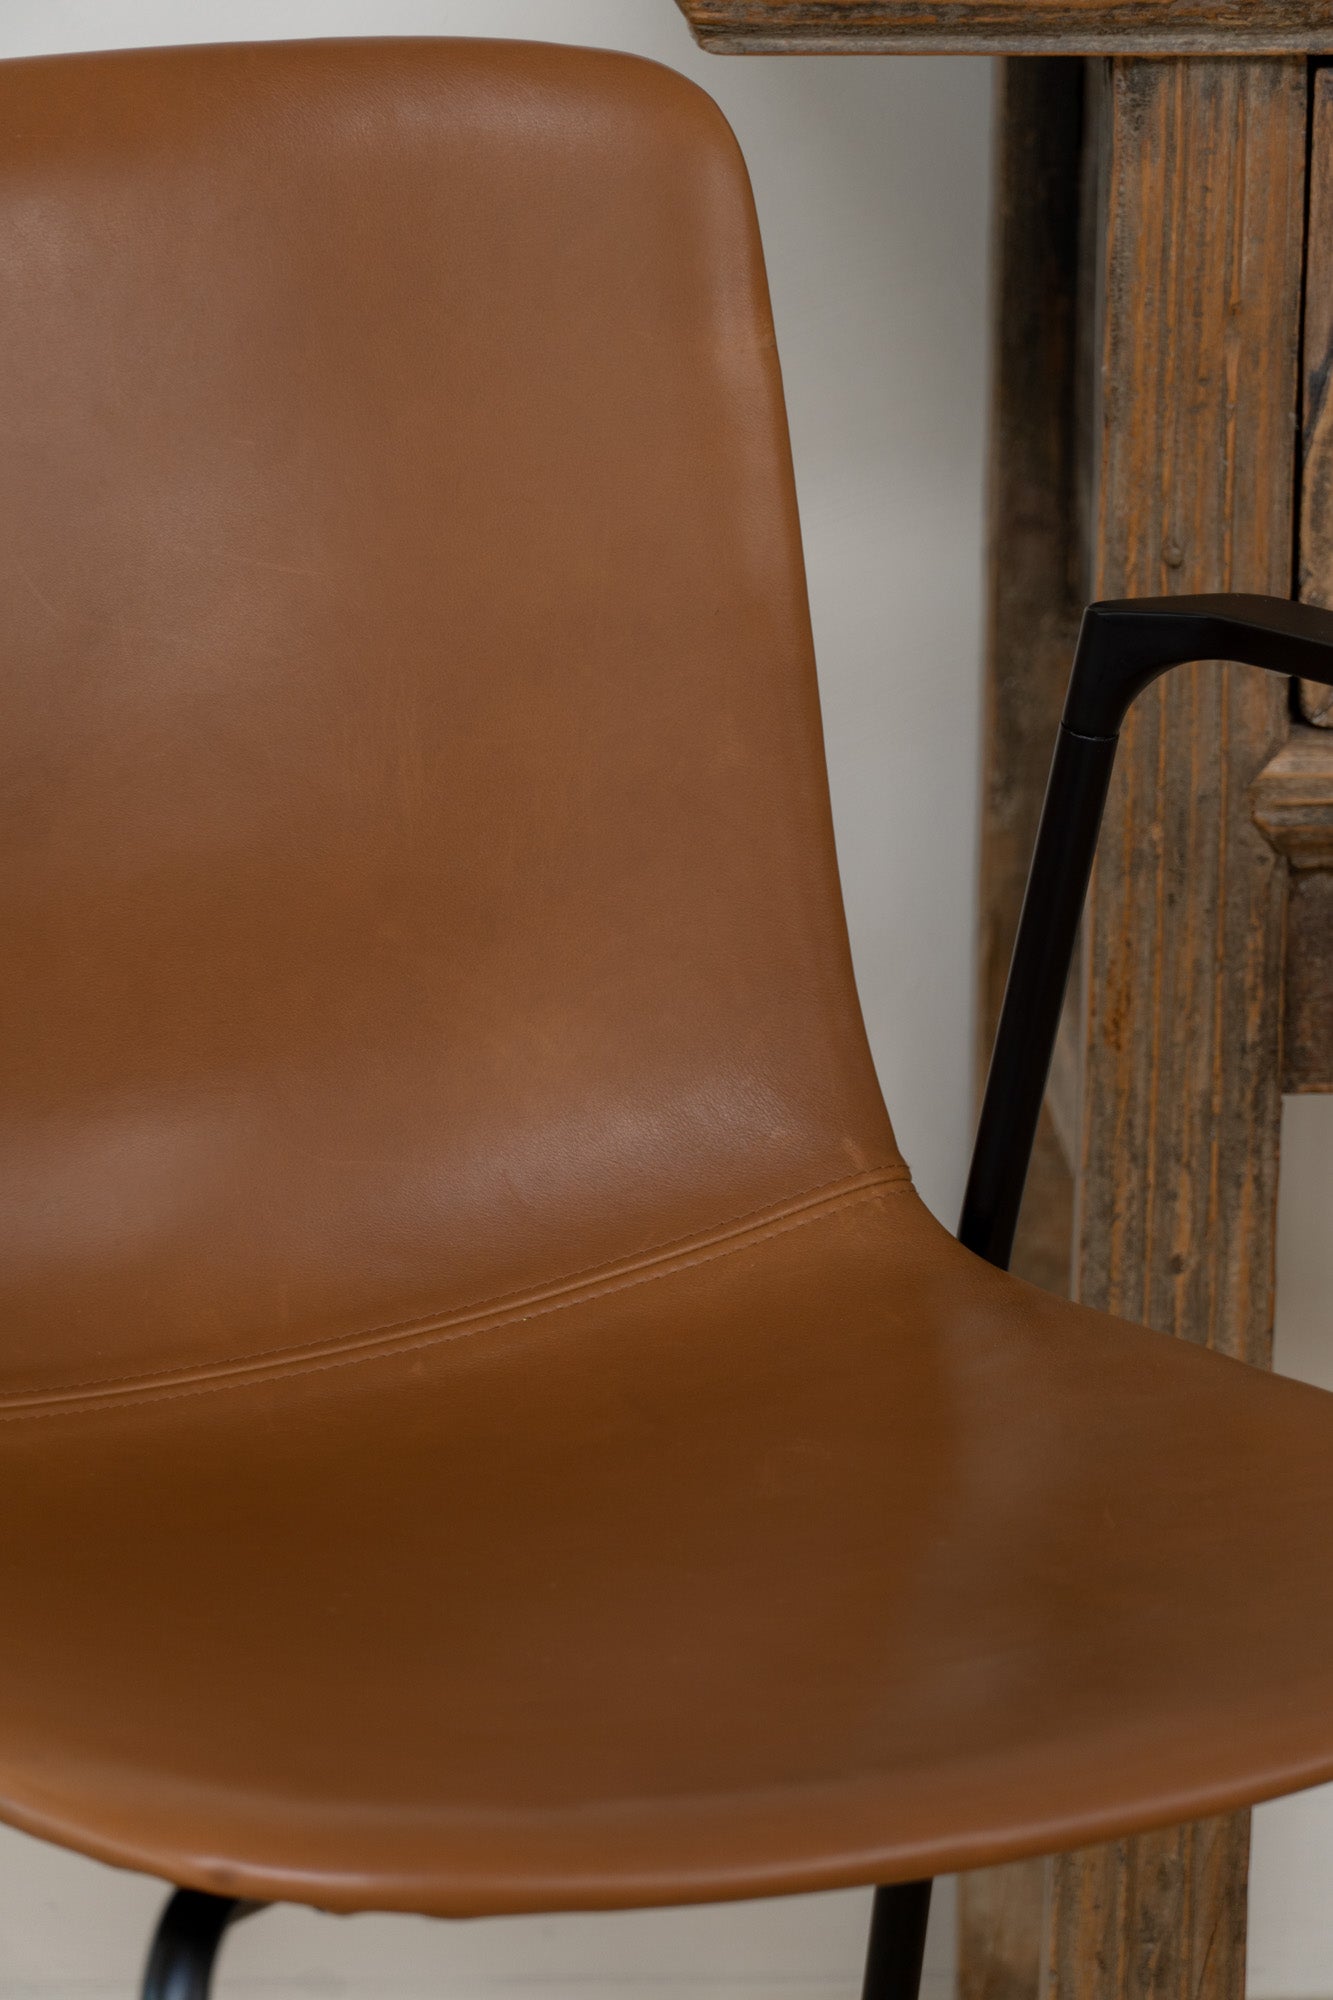 Fredericia Pato Chair - a sustainably designed chair with a black powder-coated frame and leather seating - Enter The Loft